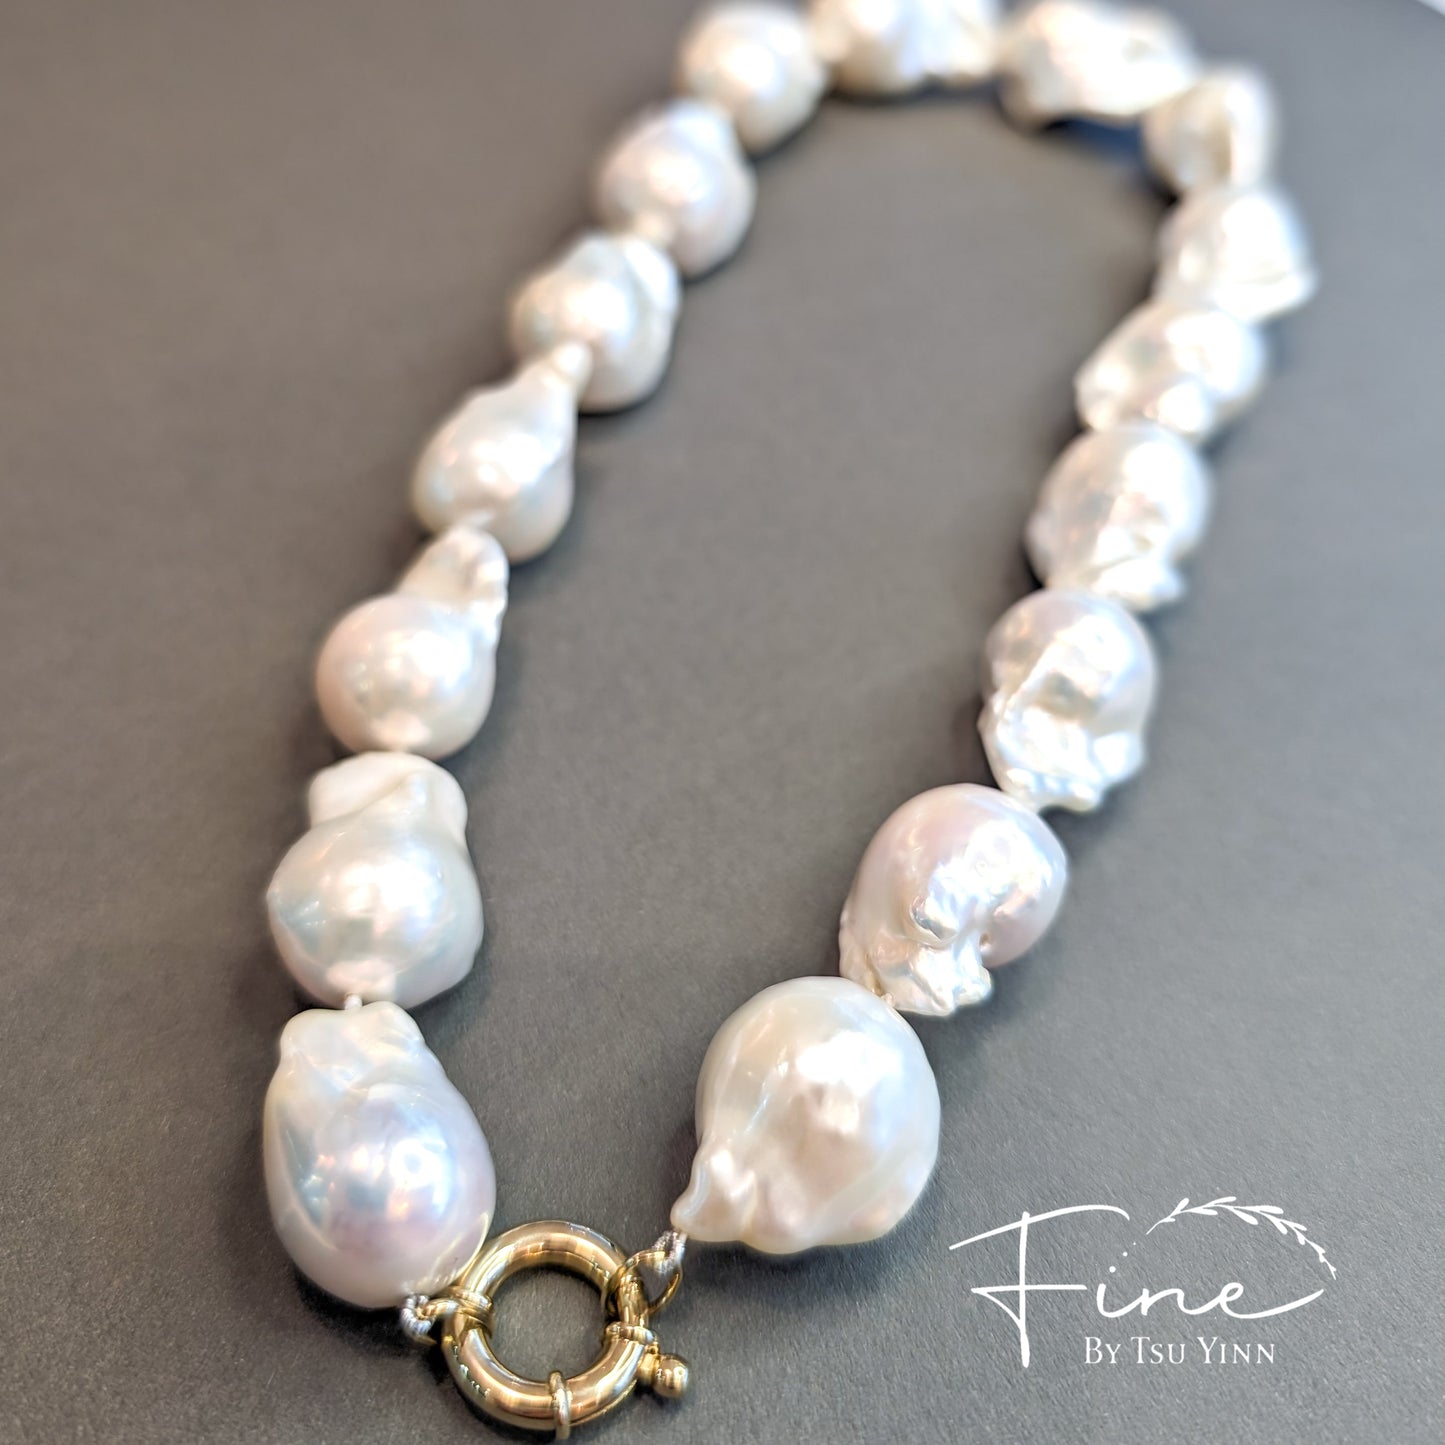 14K YG 17-19mm White Baroque Pearls Necklace